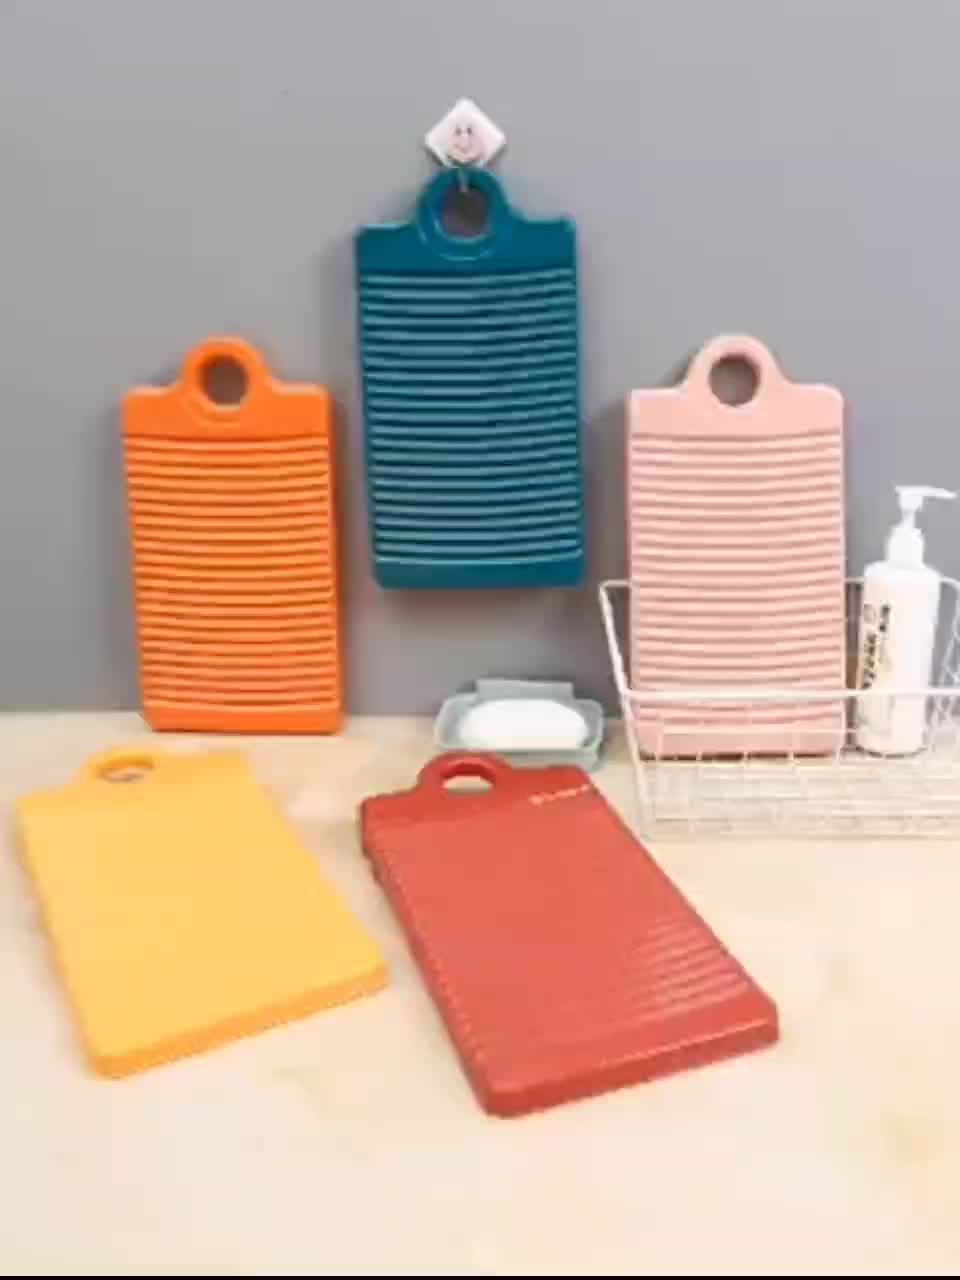  CLISPEED Anti- Washboards Washing Handheld Washboard Pumpkin  Leaf Bags Shirts Clean Board Wash Board for Laundry Manual Anti-slip  Washboards Cleaning Washboard Clothes Sock Pp Travel : Health & Household